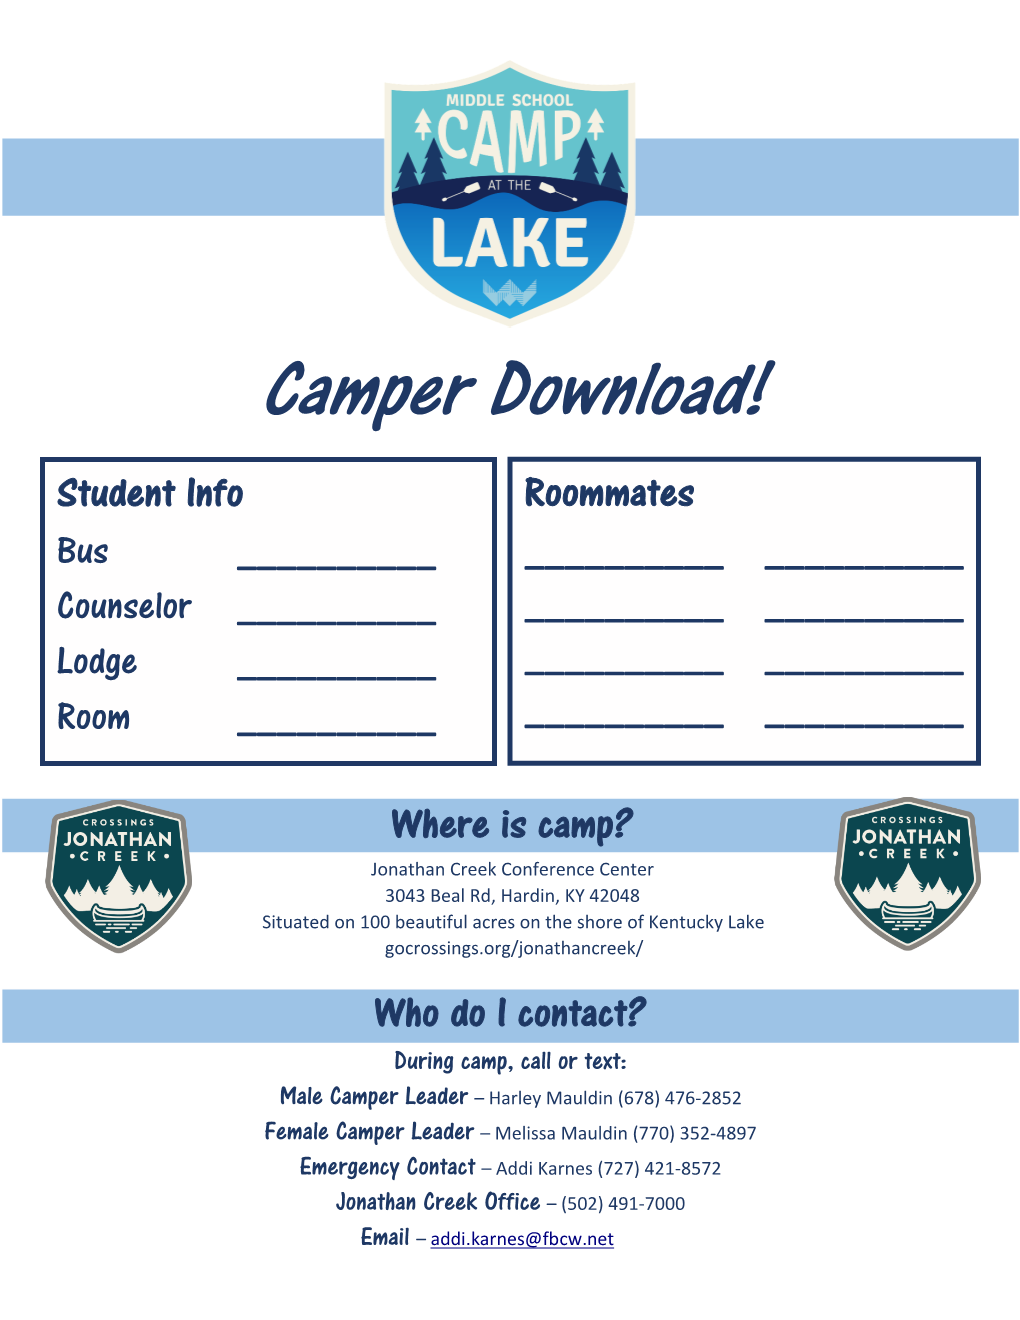 Camper Download! Student Info Roommates Bus ______Counselor ______Lodge ______Room ______